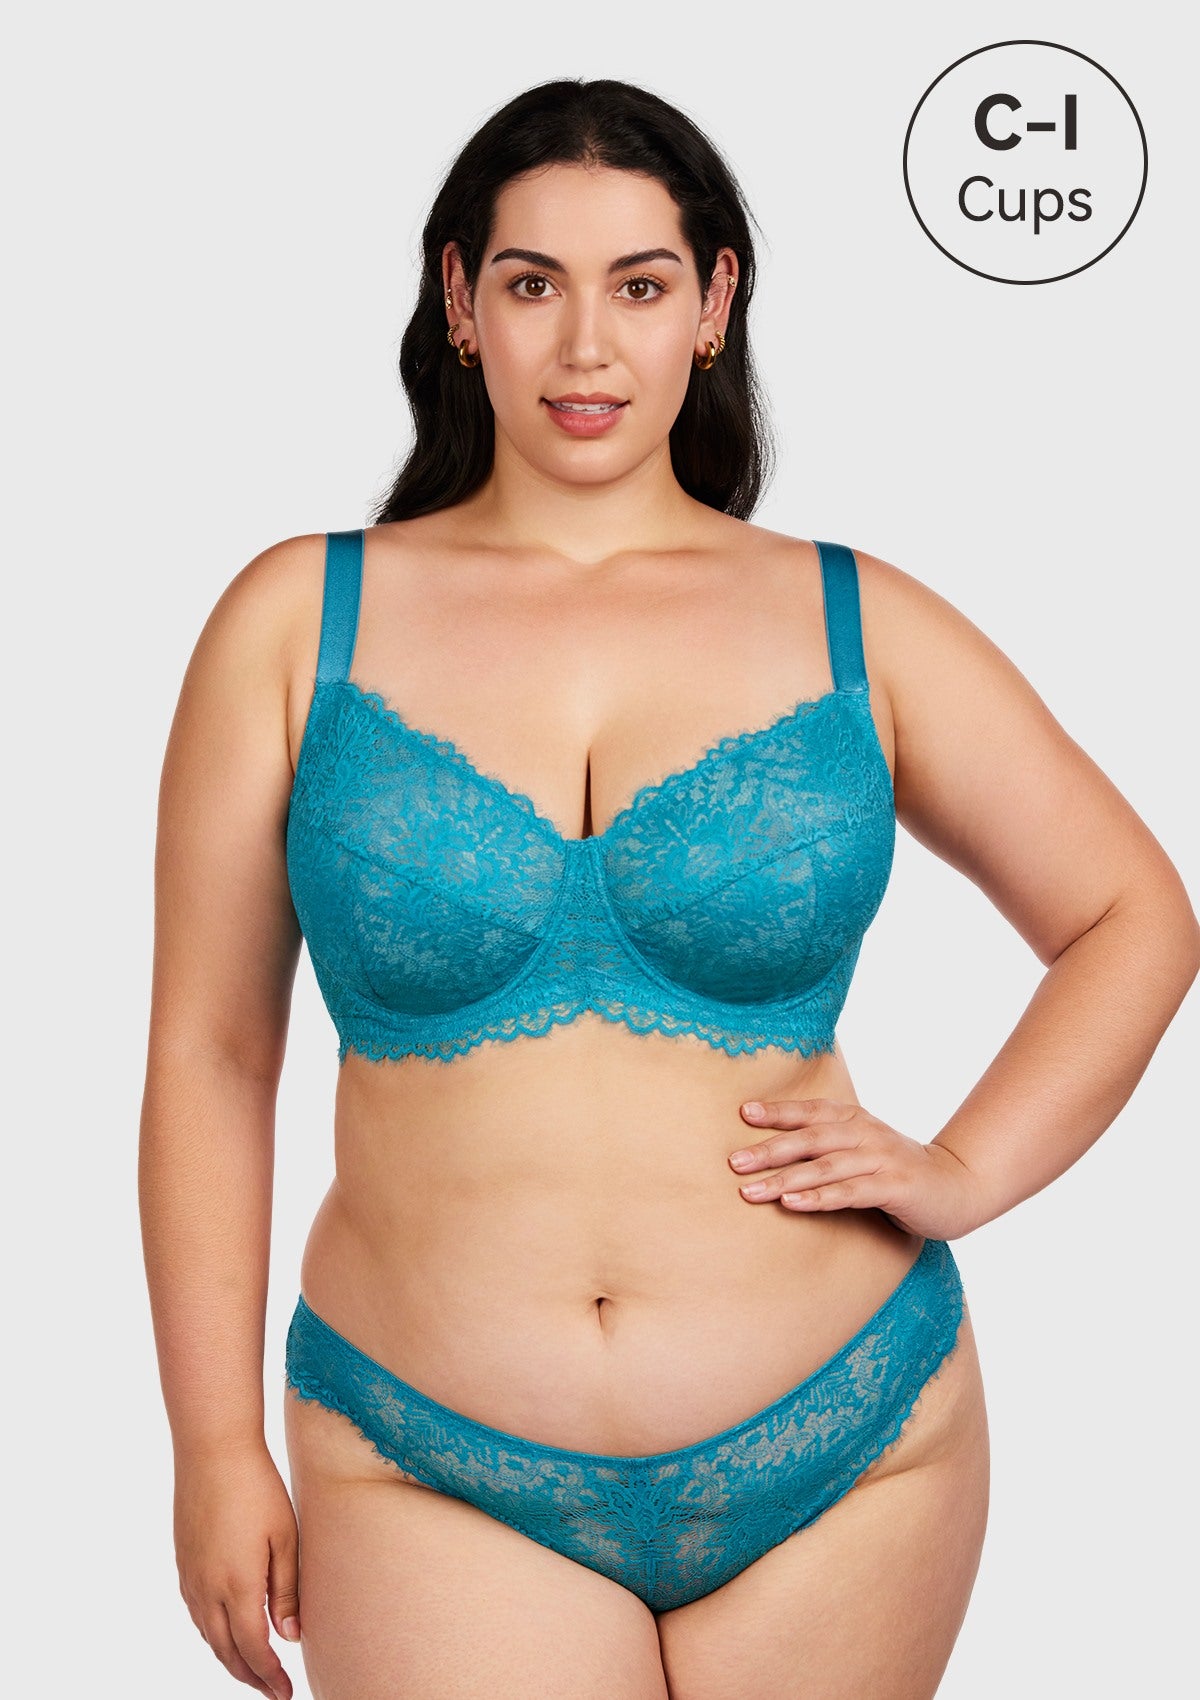 HSIA Sunflower Unlined Lace Bra: Best Bra For Wide Set Breasts - Horizon Blue / 36 / C